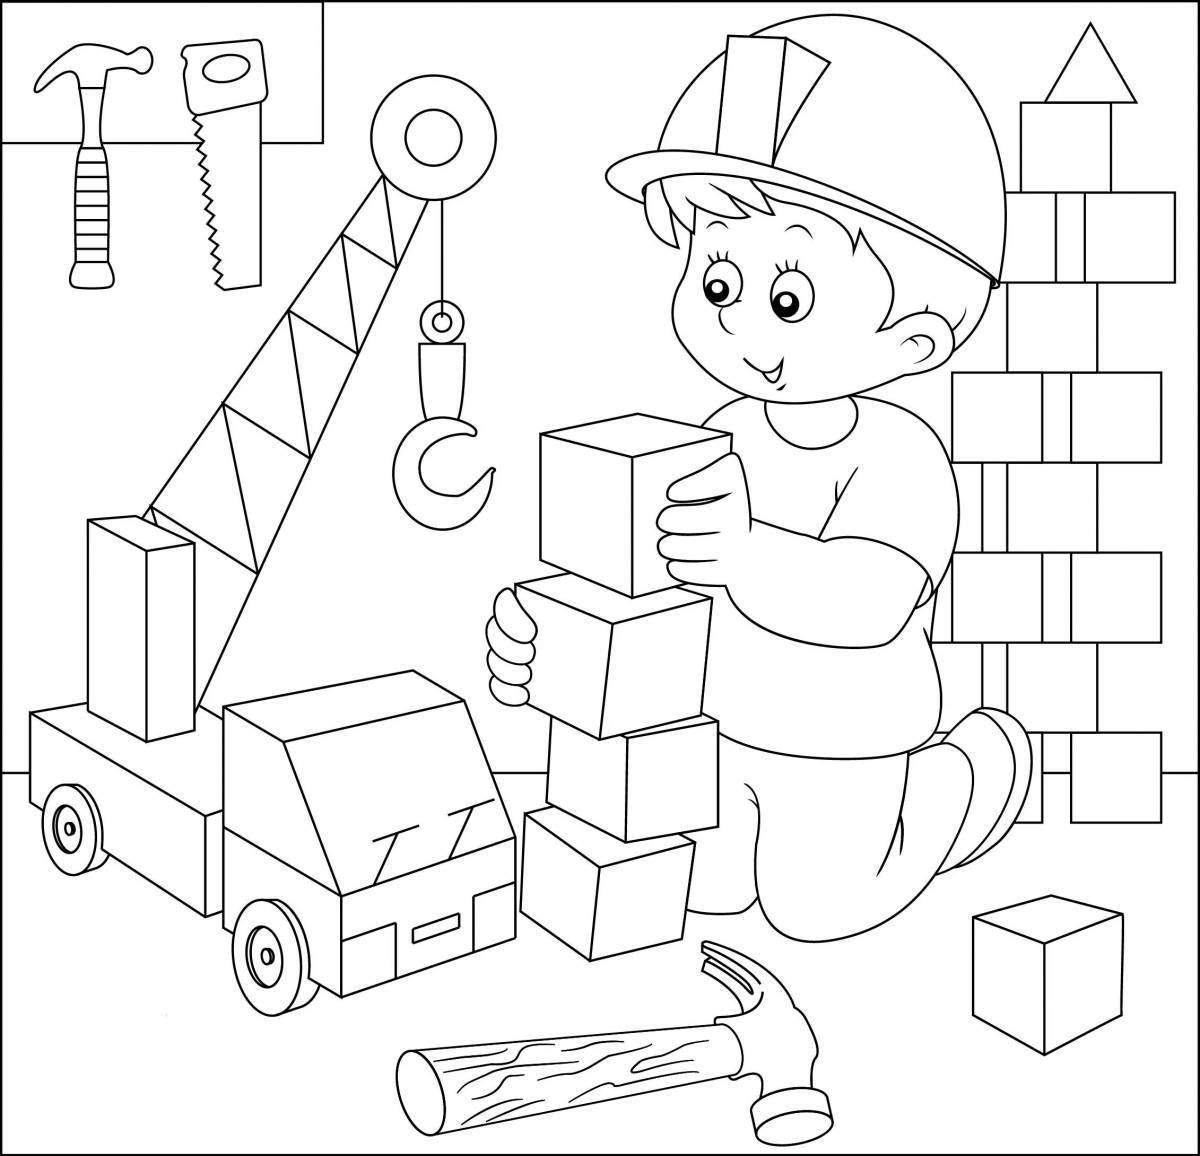 Playful builder coloring page for kids